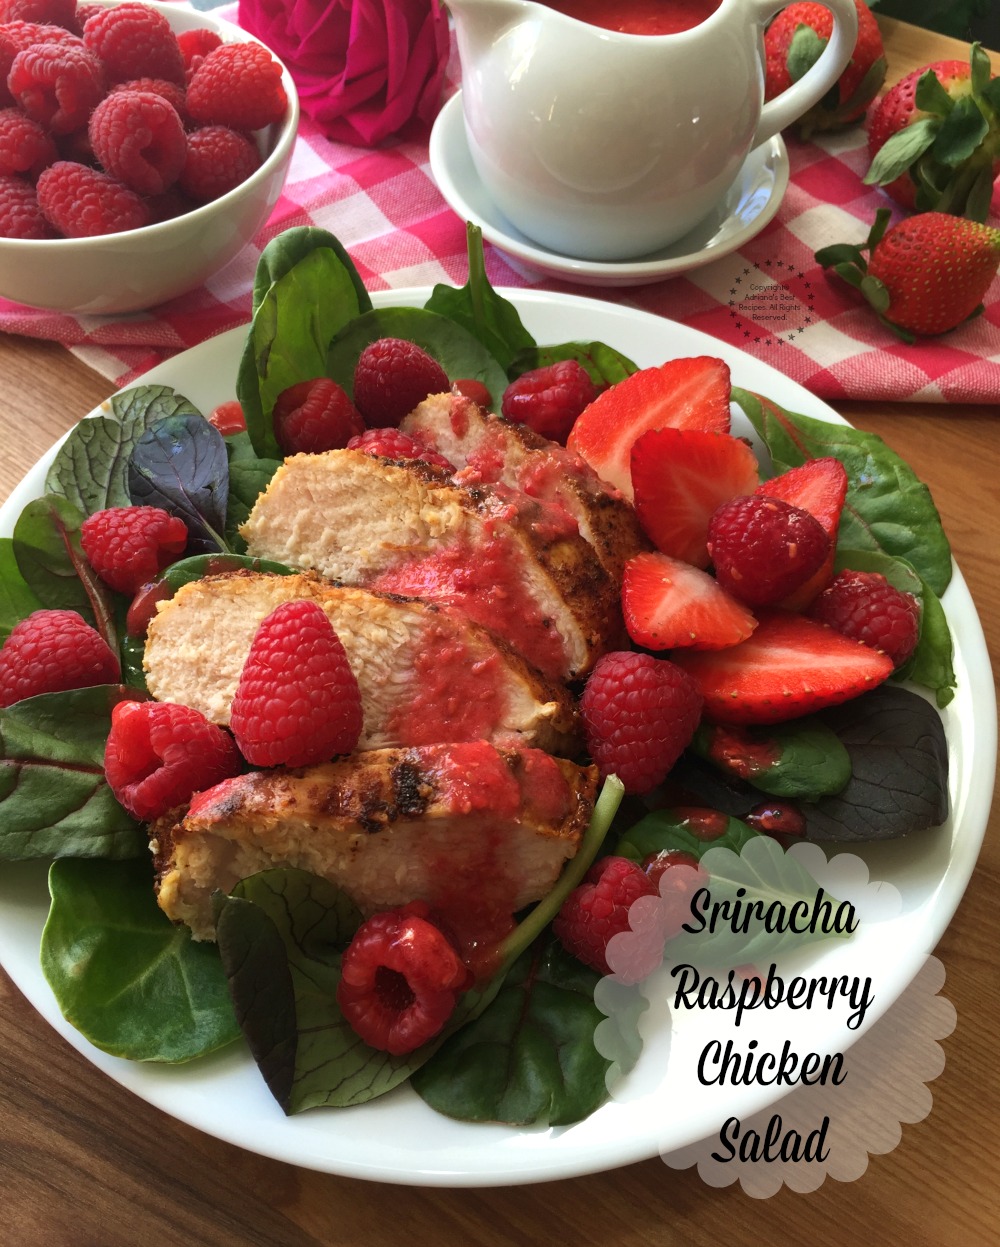 Lovely Sriracha Raspberry Chicken Salad, made with fresh greens, raspberries, grilled chicken and a homemade spicy raspberry dressing